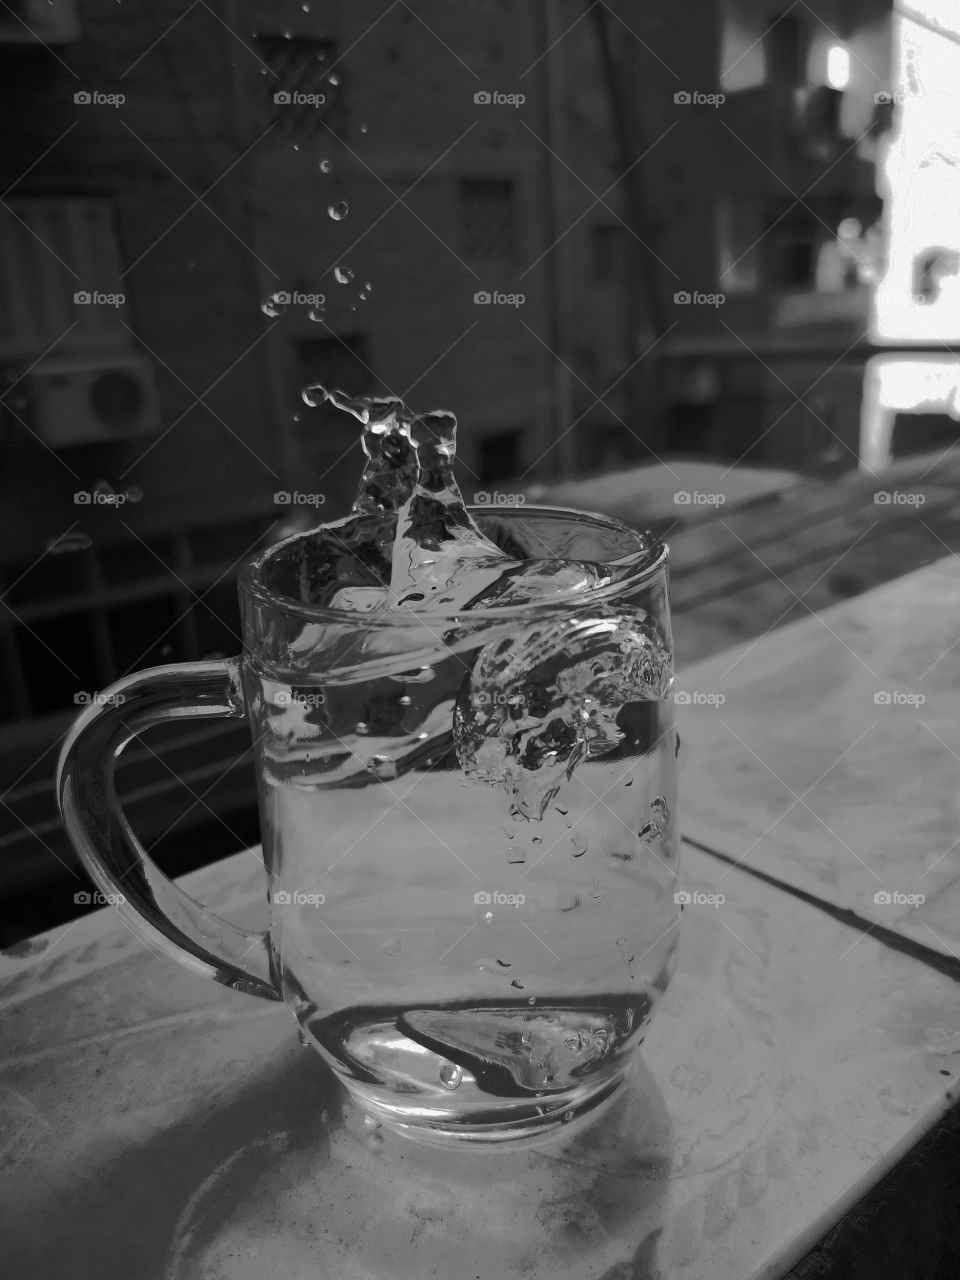 Flying water.